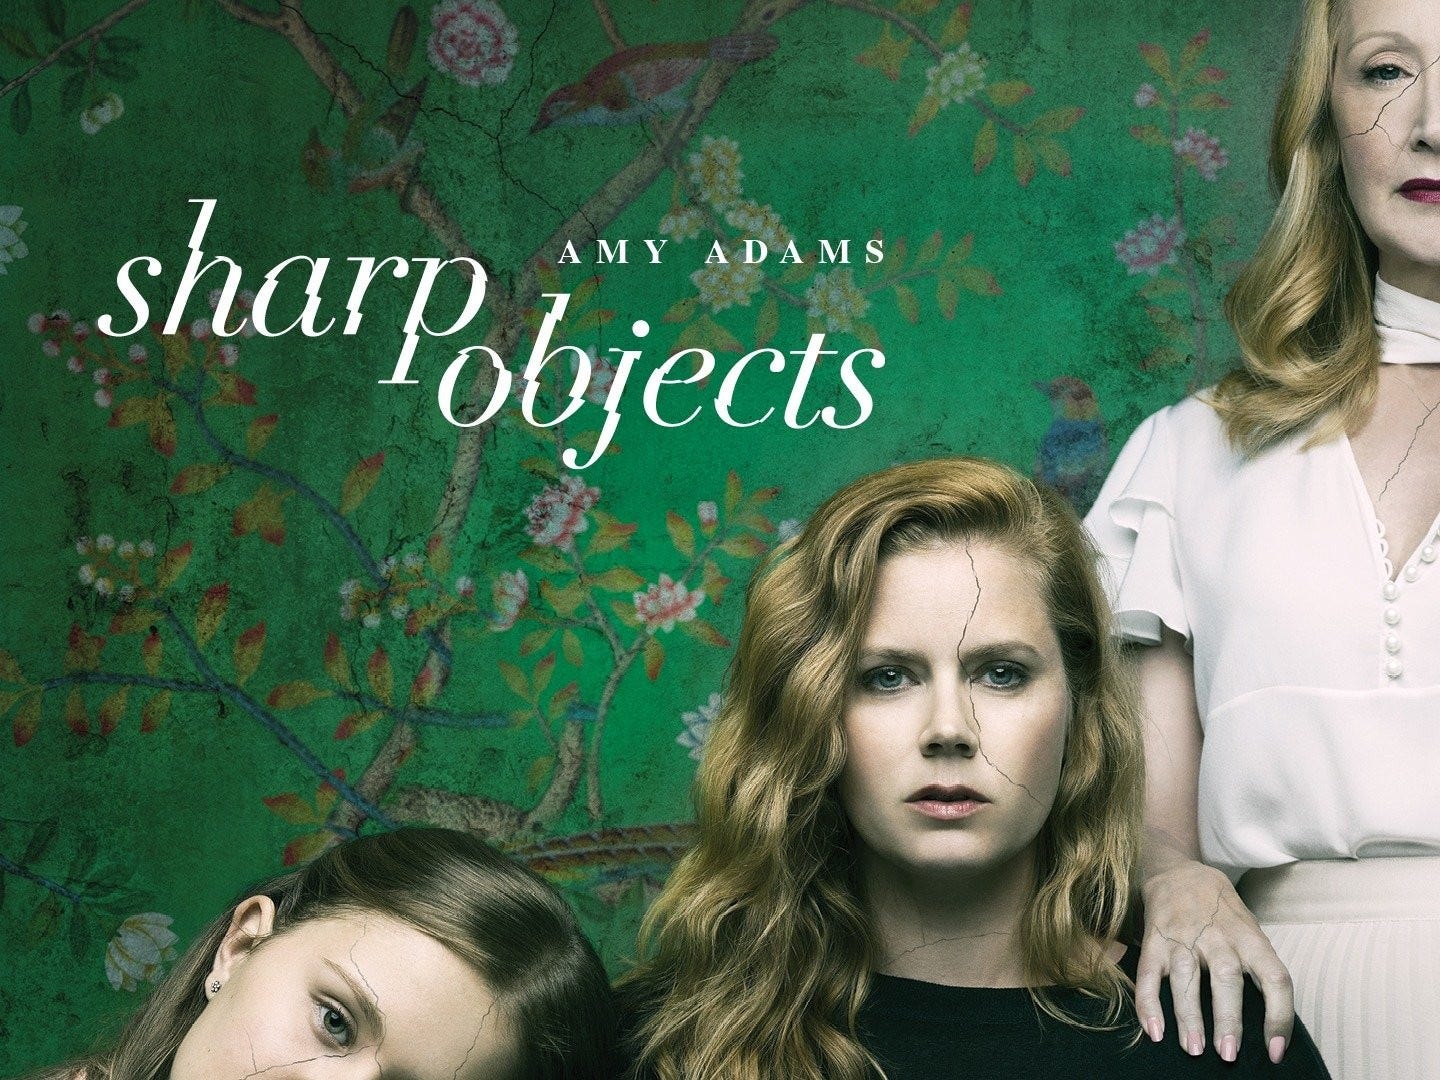 Sharp Objects poster with 3 main characters: Amma, Camille, and Adora